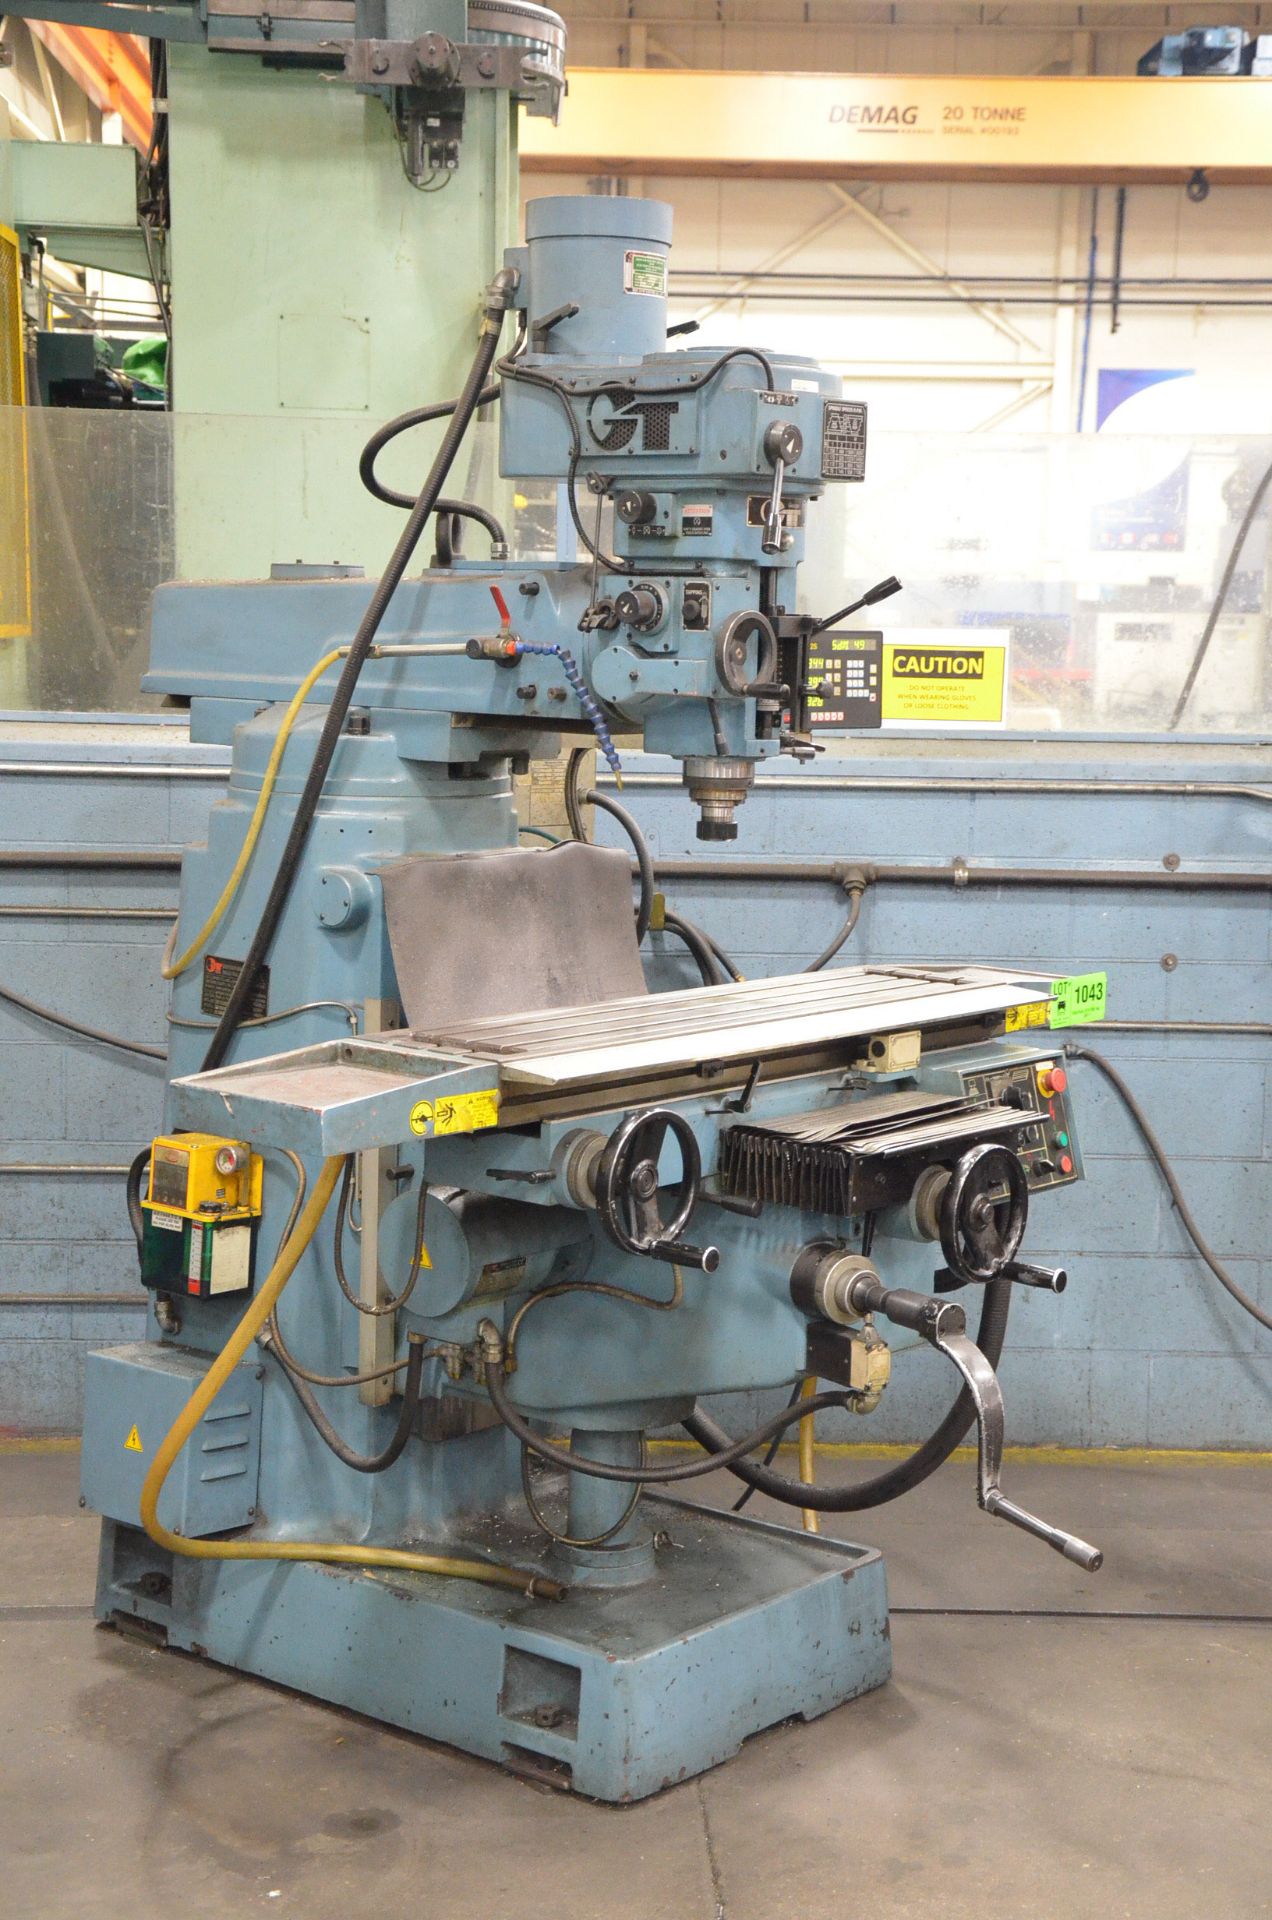 GENTIGER (2008) SHCM-S96RA VERTICAL TURRET MILLING MACHINE WITH 49"X11" TABLE, SPEEDS TO 3600 RPM,